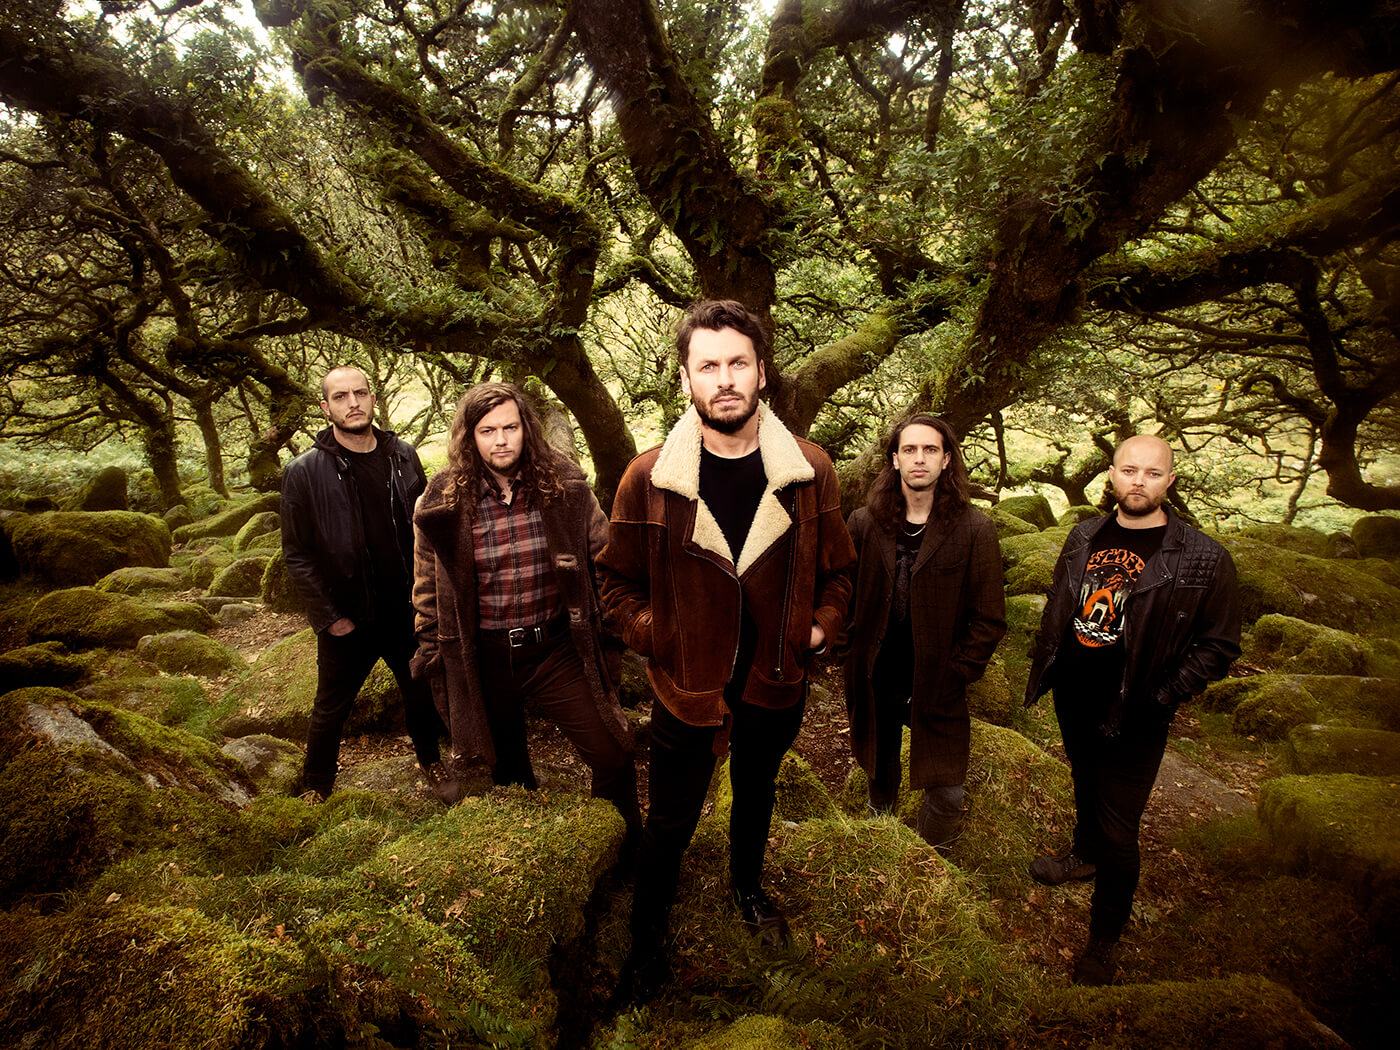 Green Lung combat doom metal tropes in their latest release, Woodland Rites   | All Things Guitar